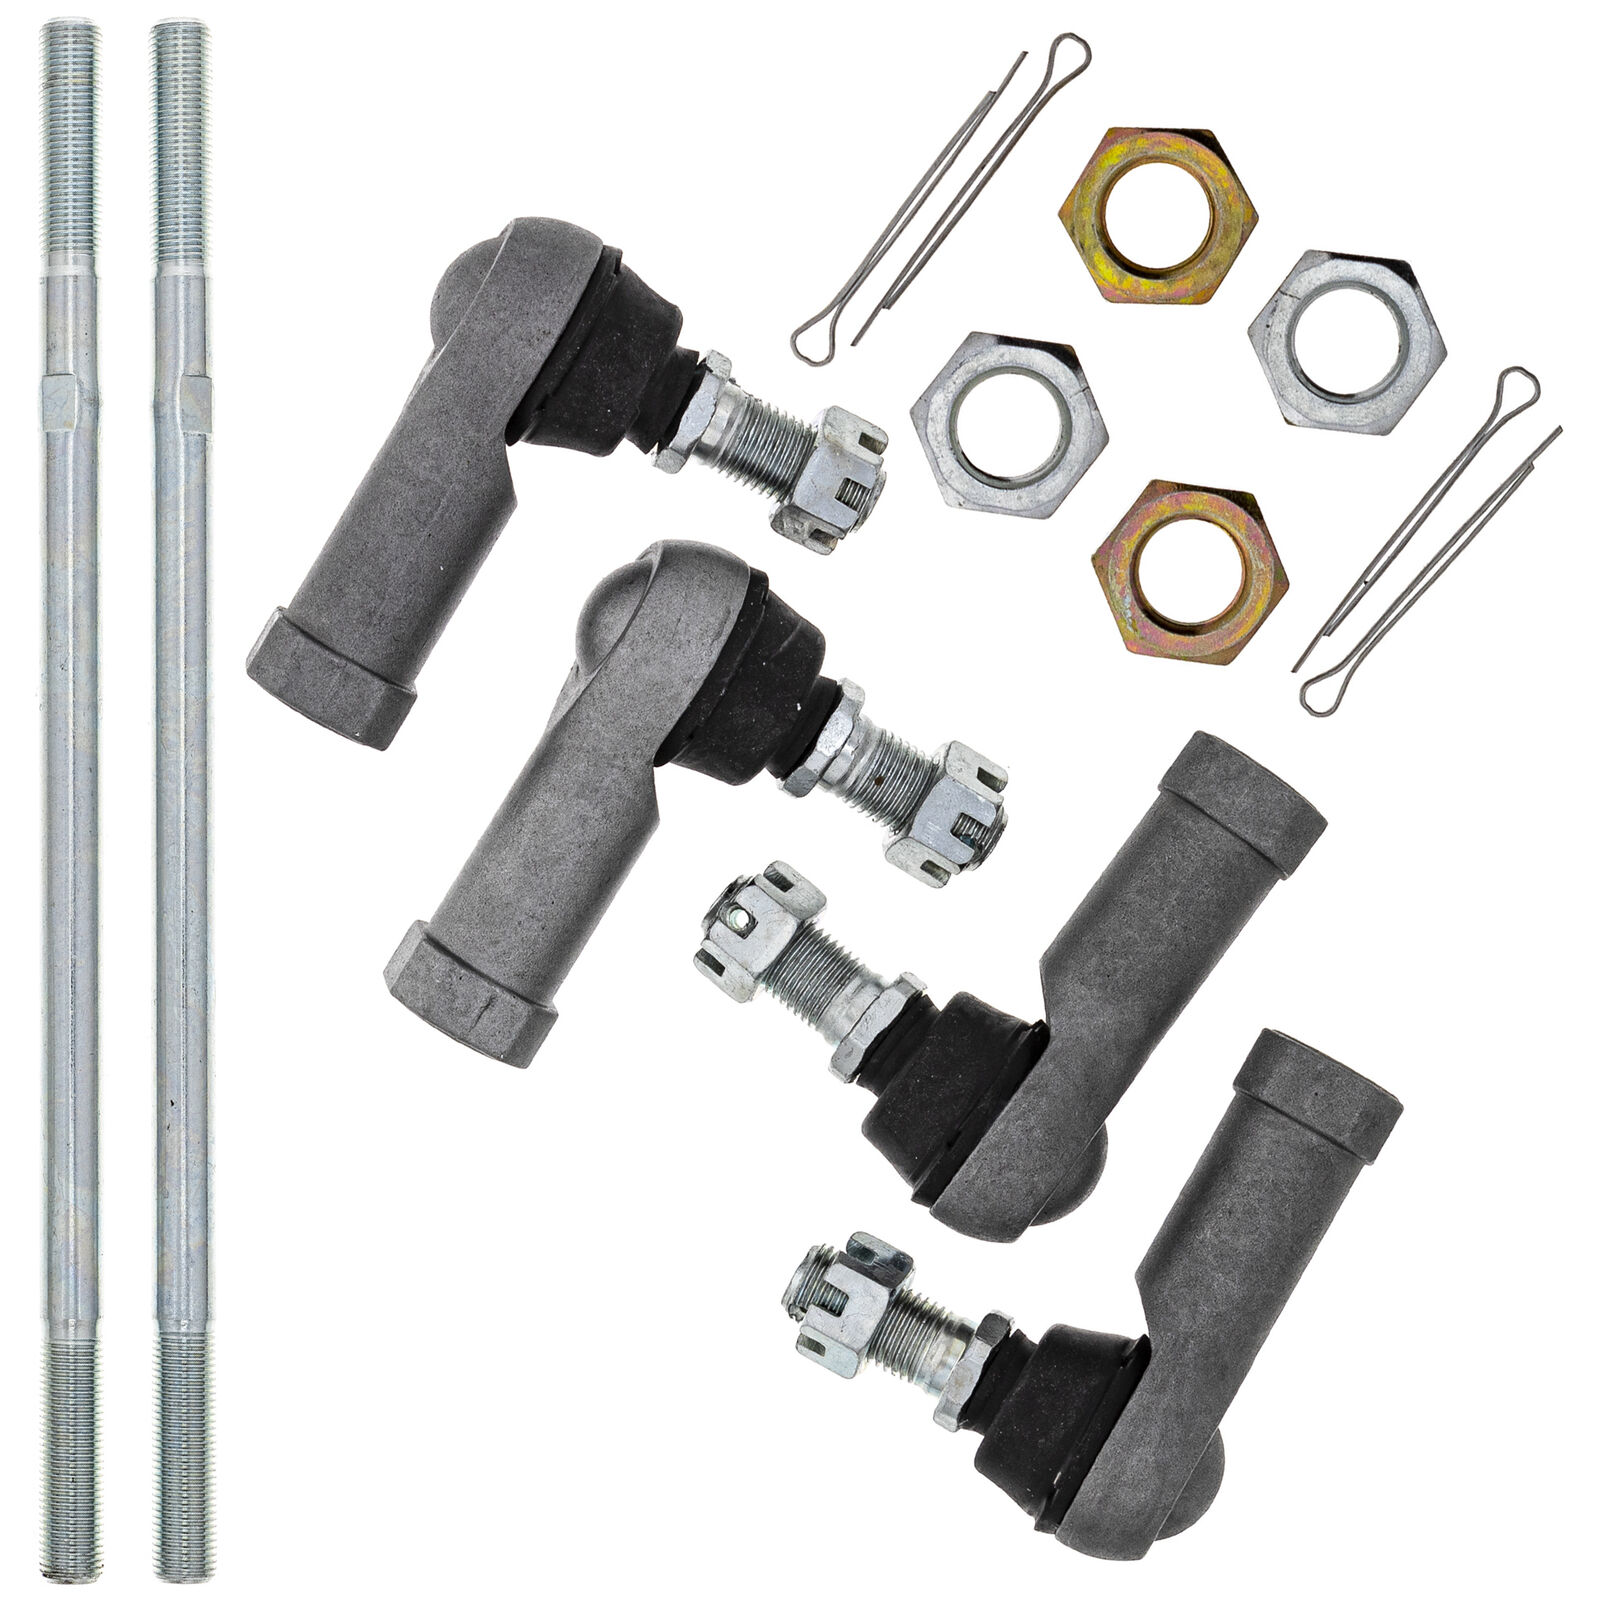 NICHE Tie Rods with End Kit for Honda Rancher 350 TRX350 400 TRX400 ATV